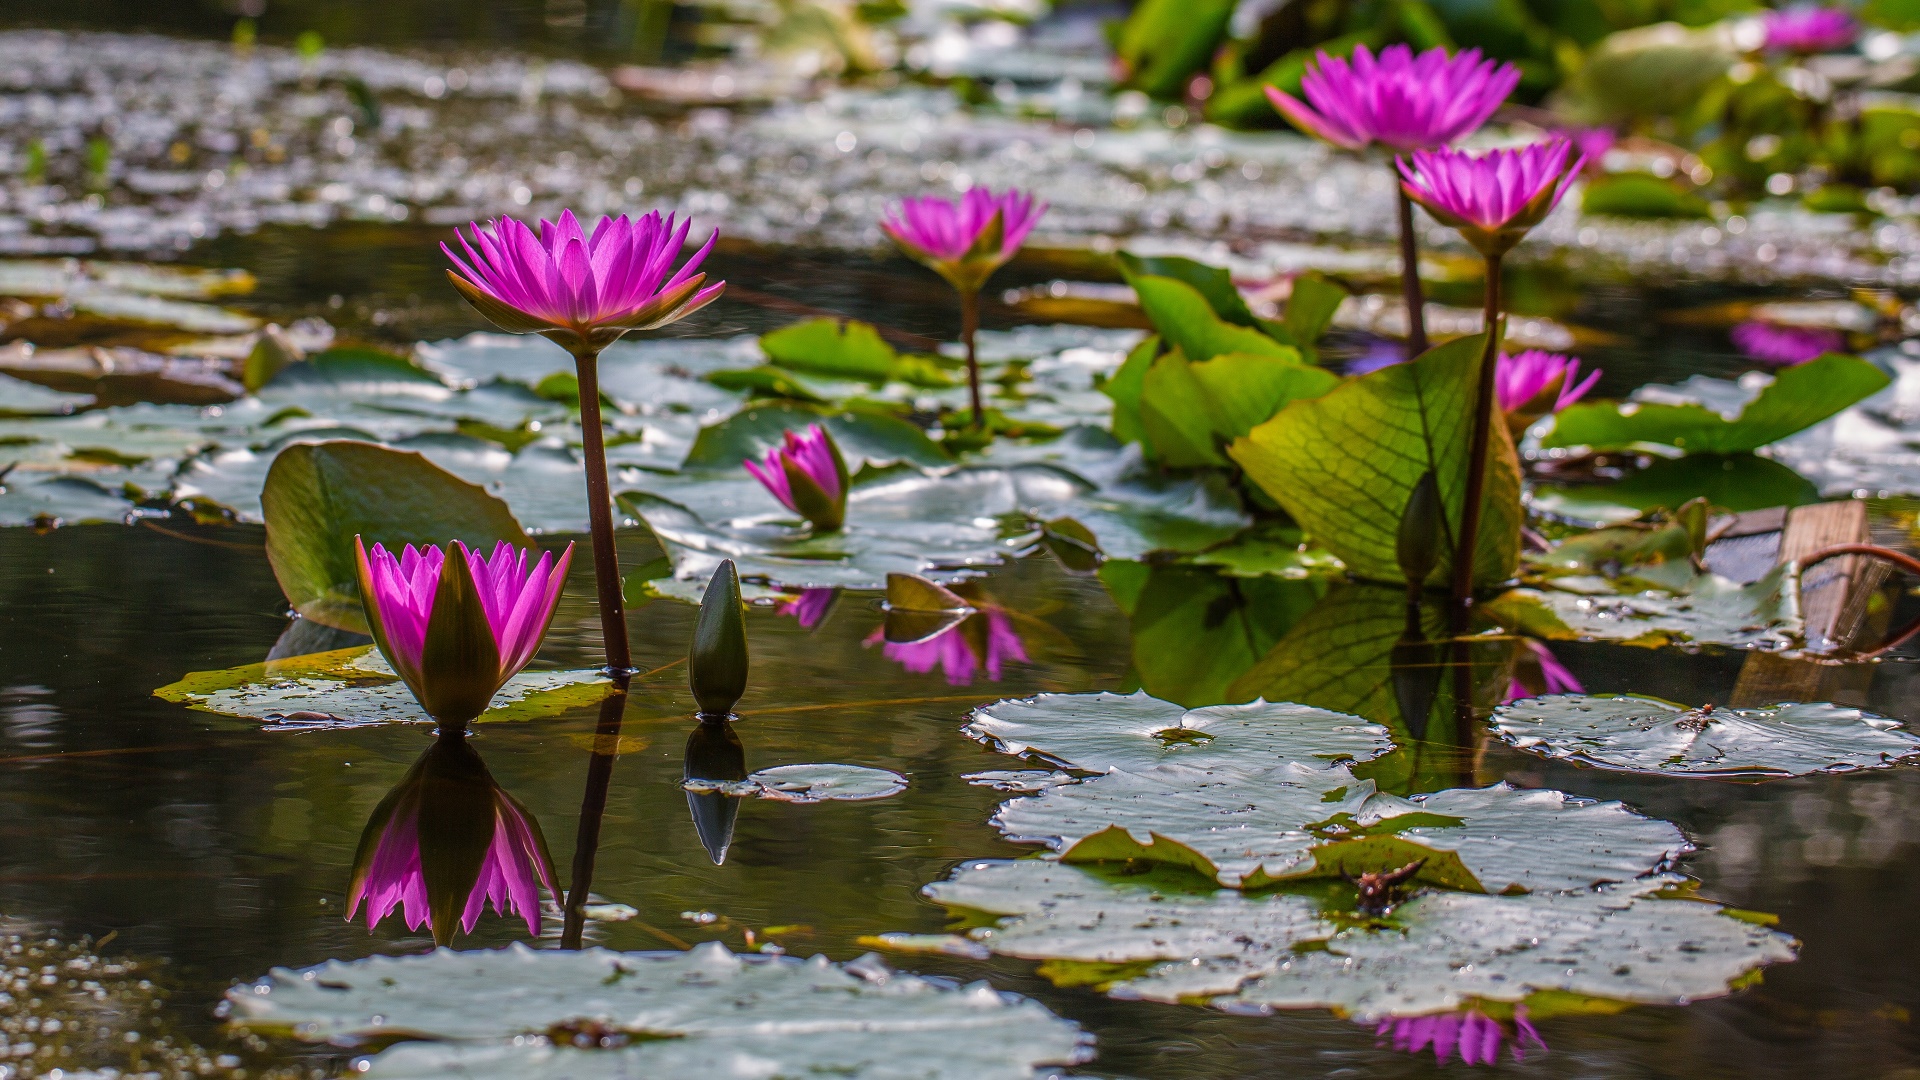 General 1920x1080 water nature flowers plants